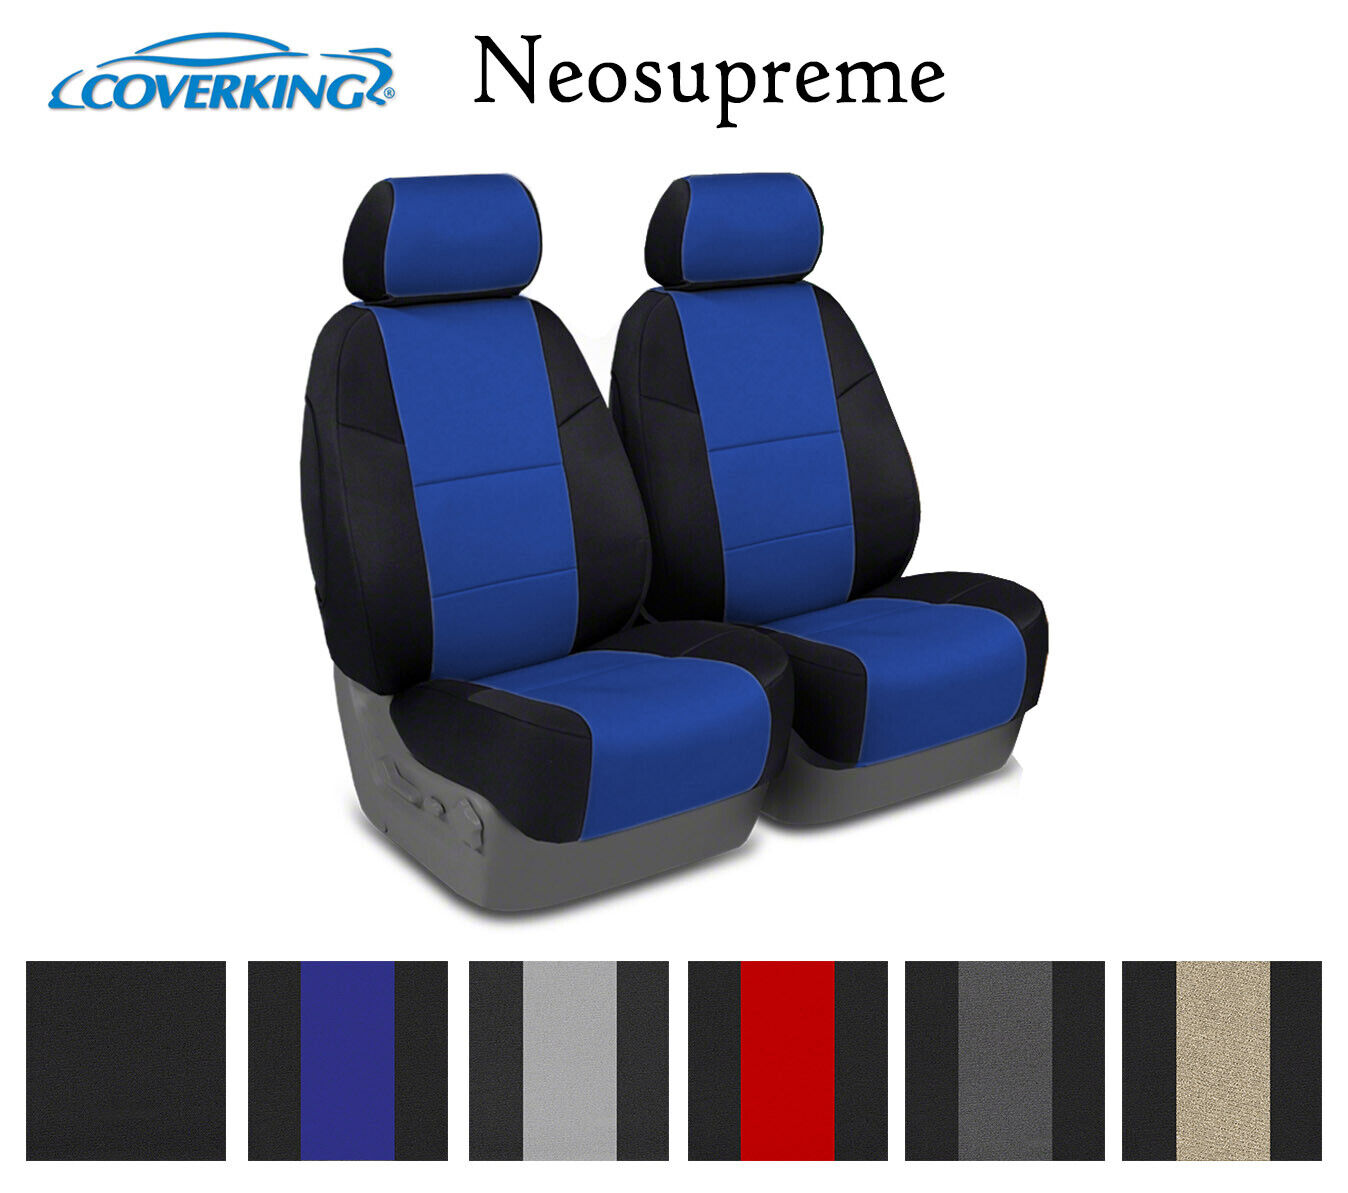 Coverking Custom Seat Covers Neosupreme Front Row - 6 Color Options